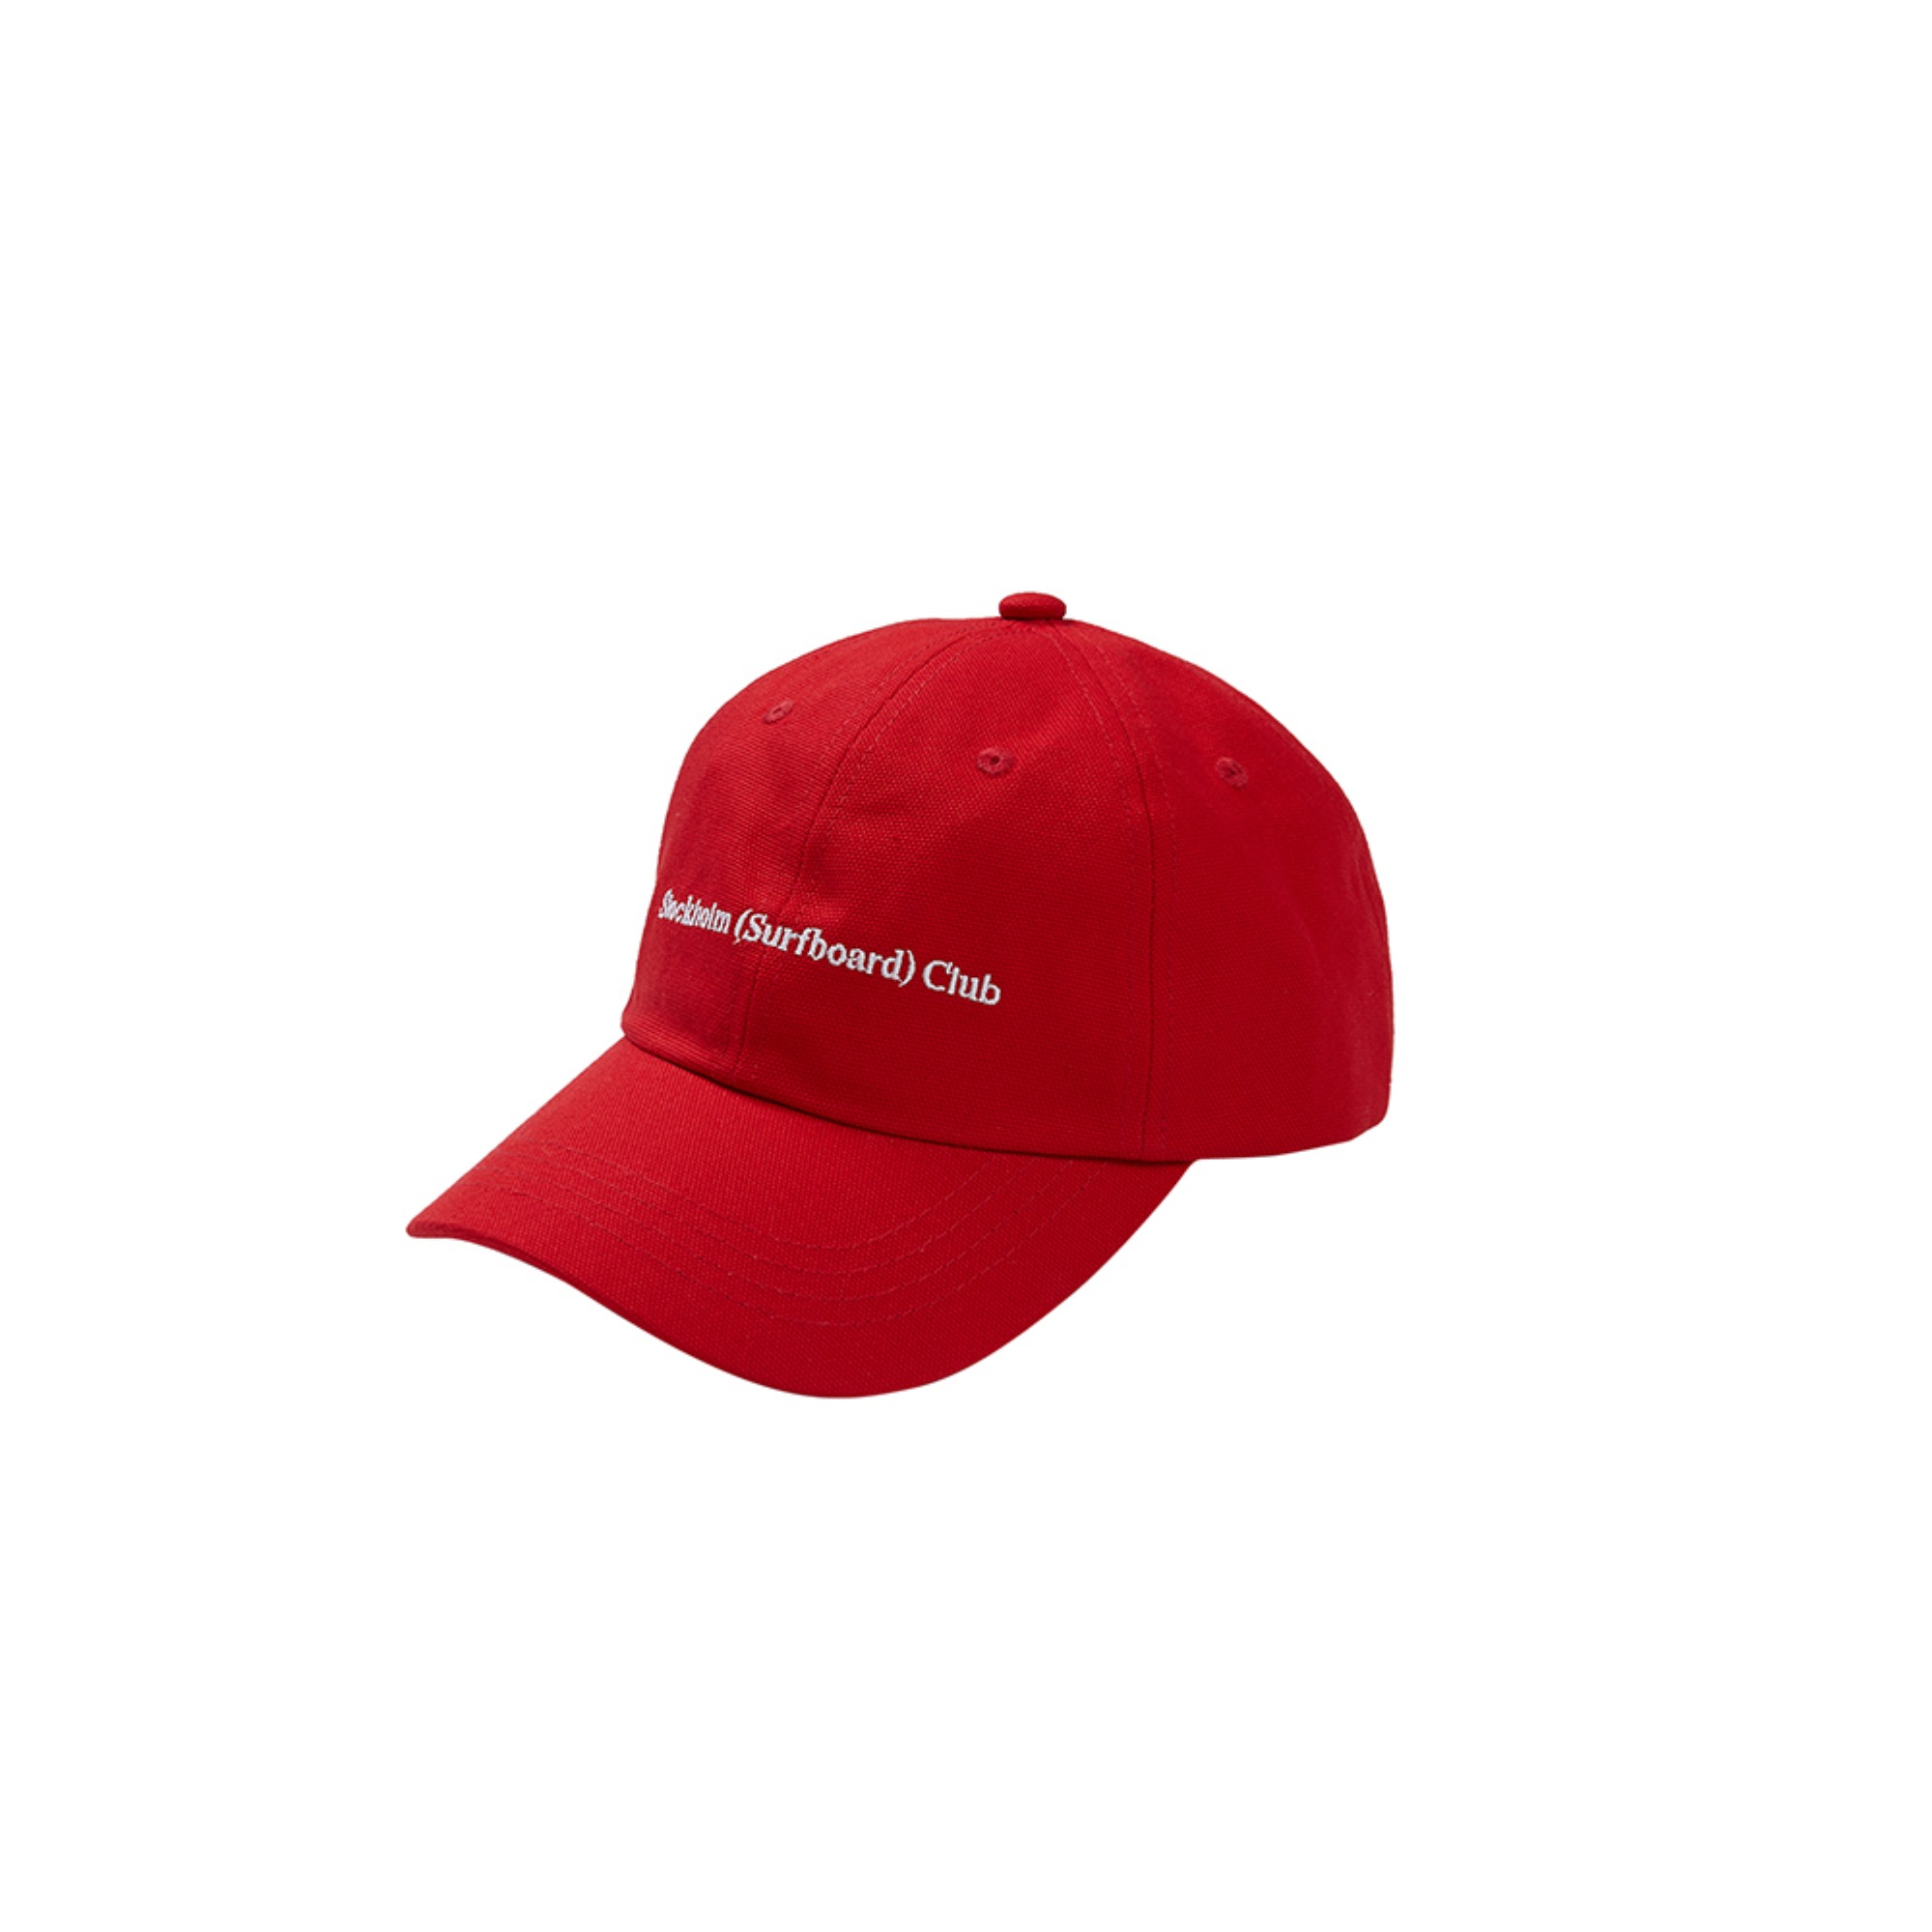 STOCKHOLM SURFBOARD CLUB PAC CAP KNA009m(RED)